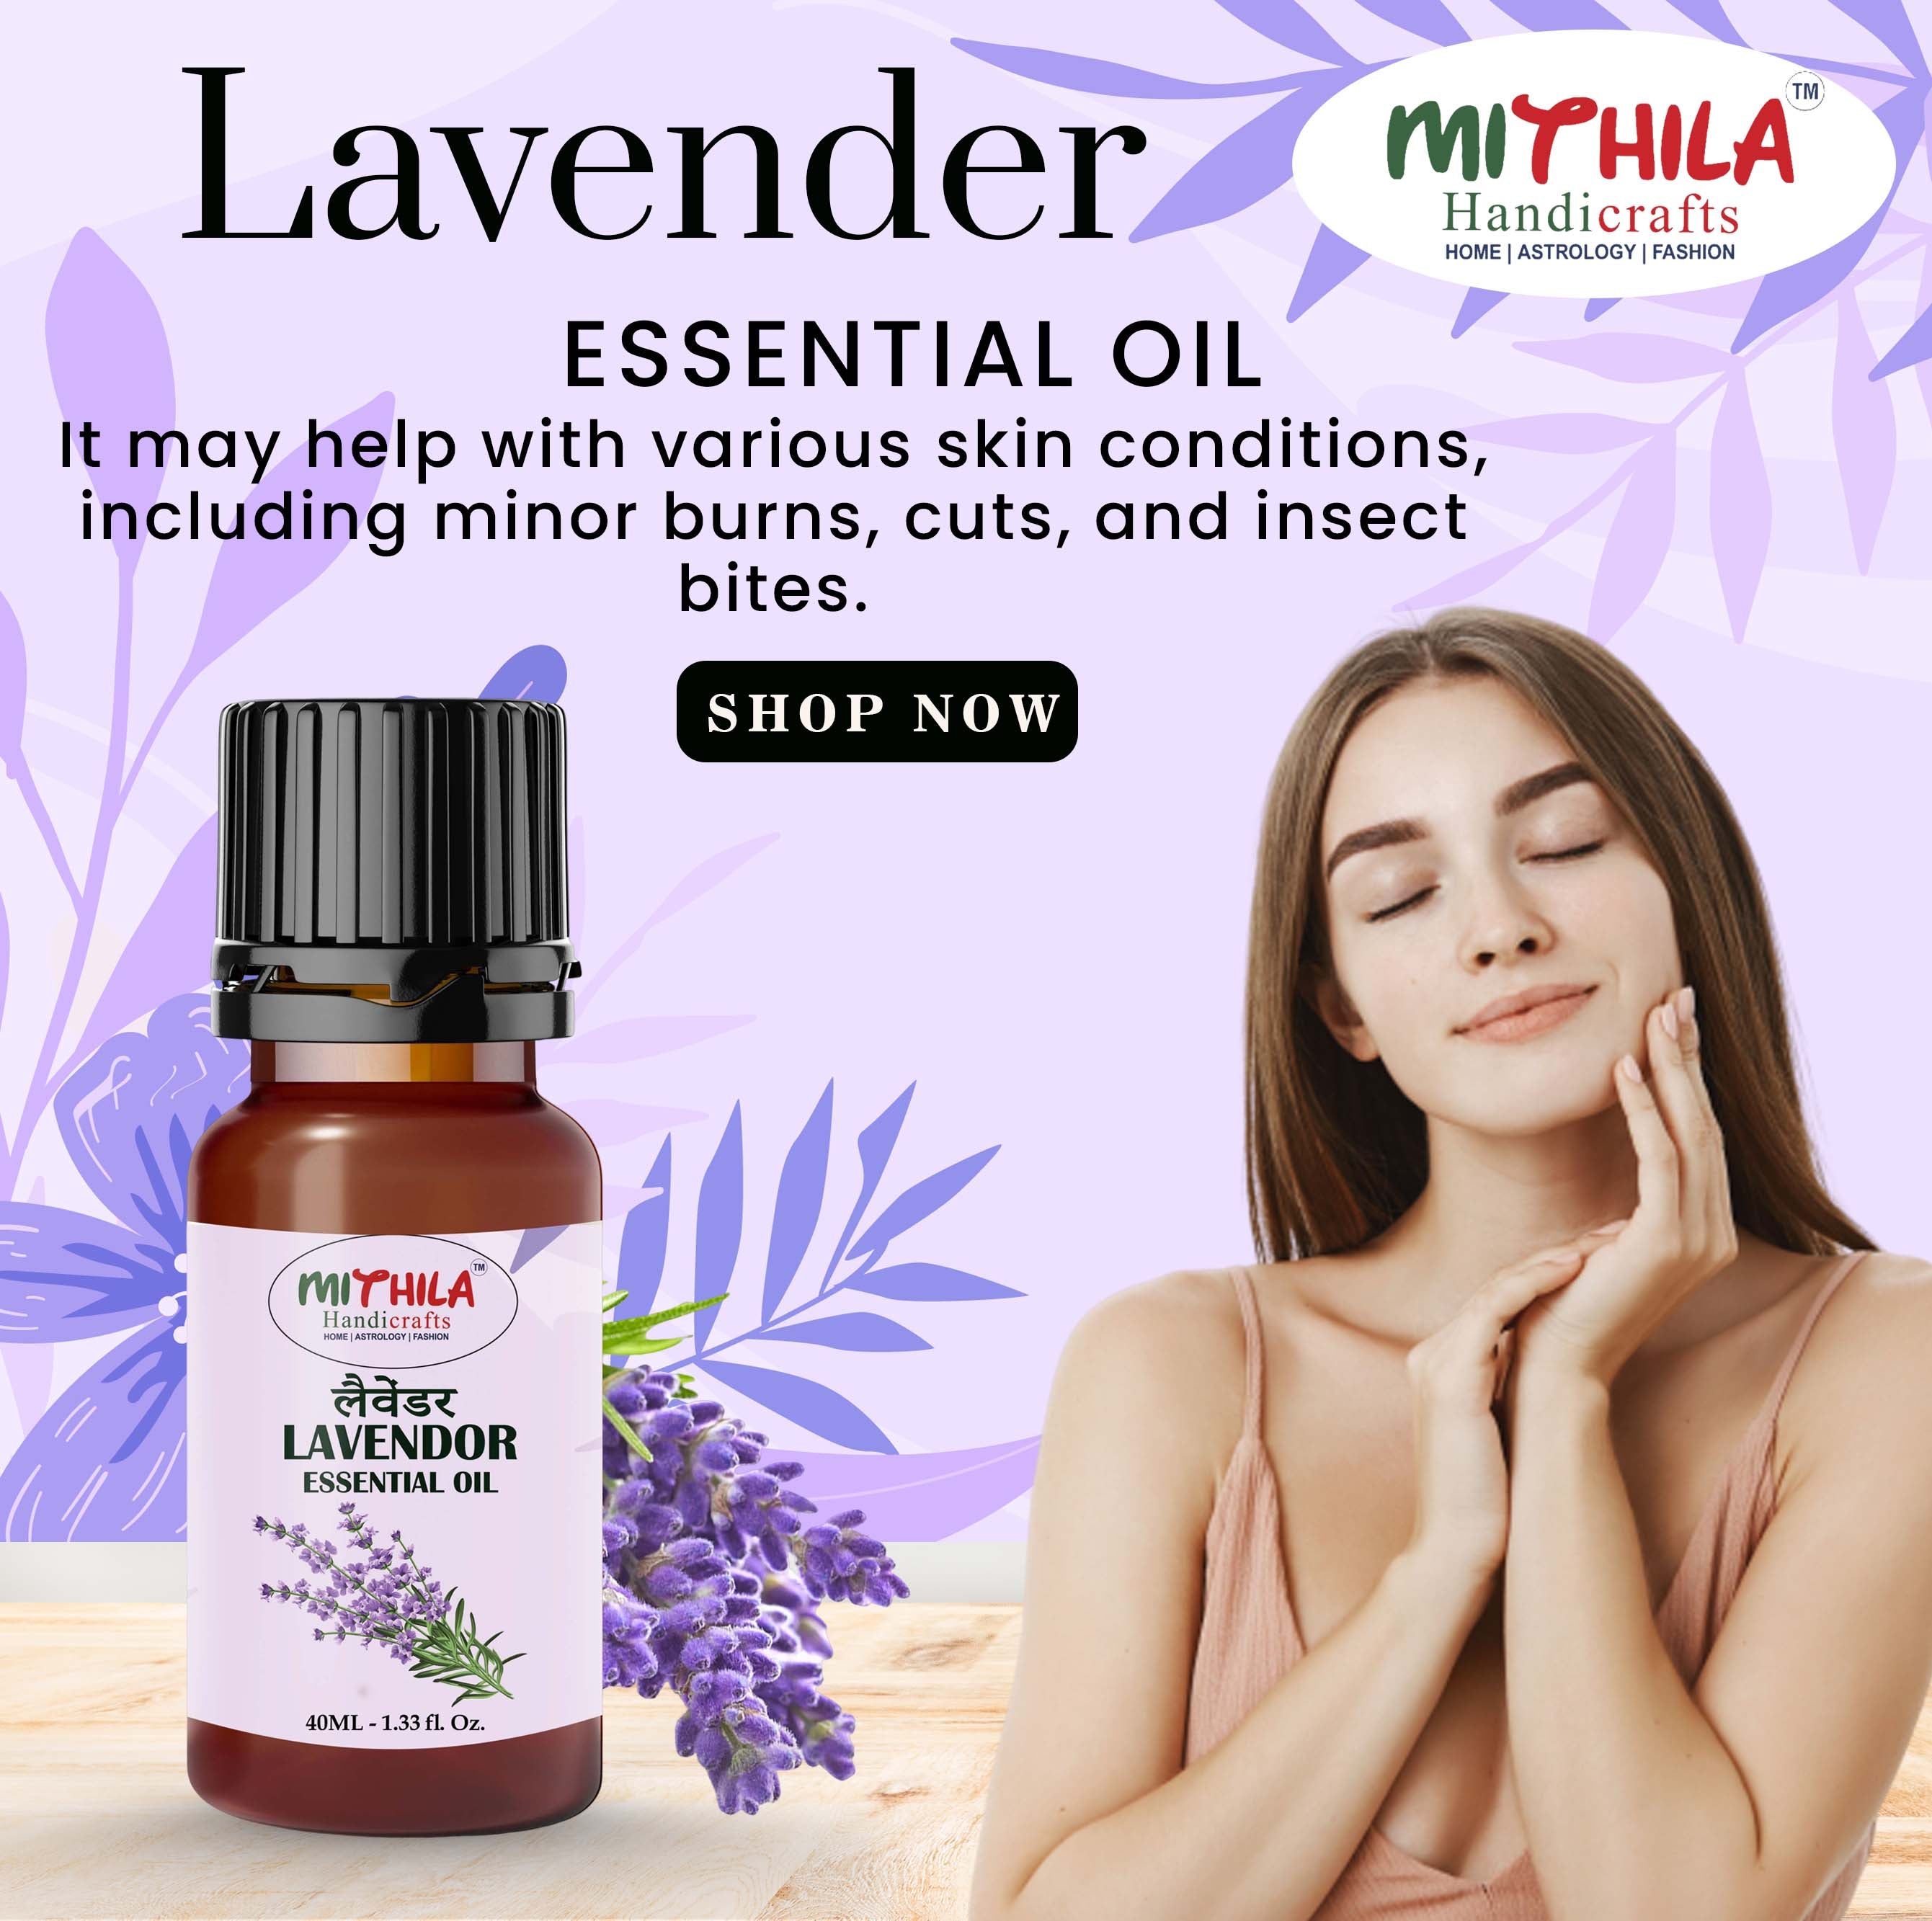 Lavender Essential Oil For Skin, Hair Care, Home Fragrance, Aroma Therapy 30ml